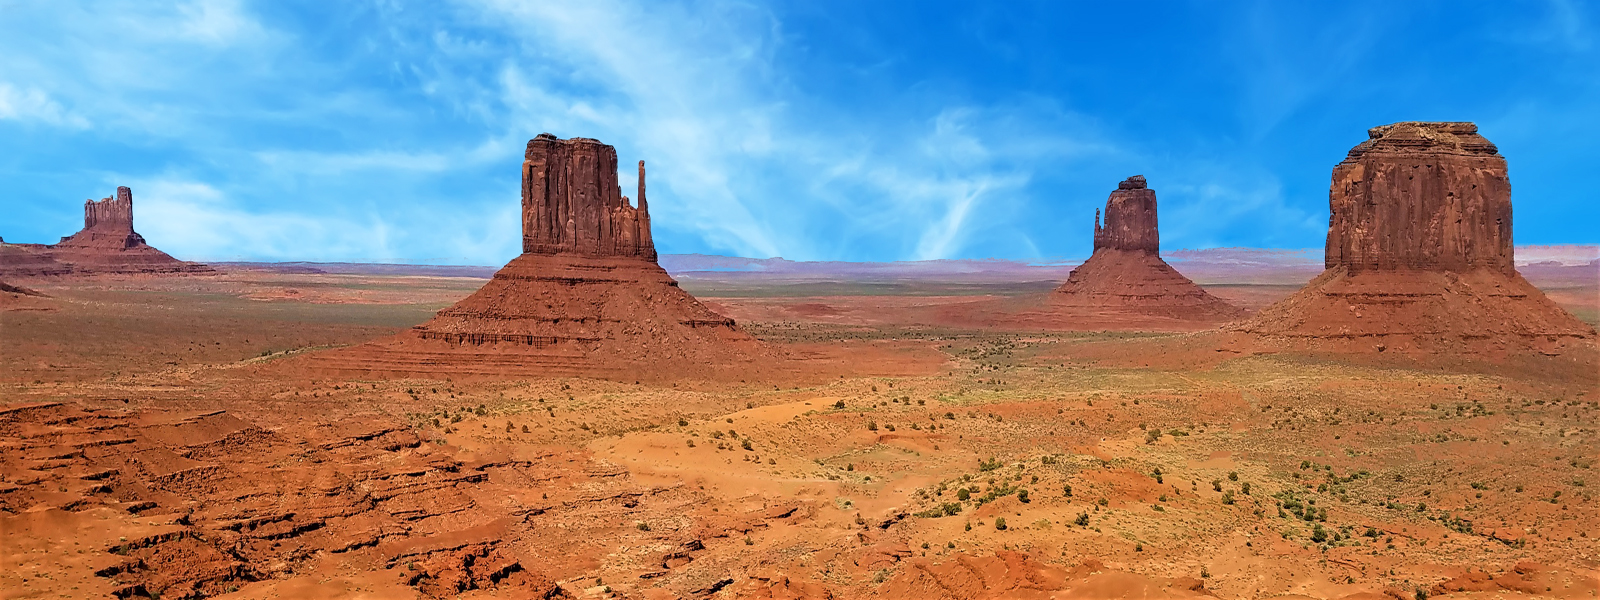 Monument Valley - Navajo Nation - Photo by Judy